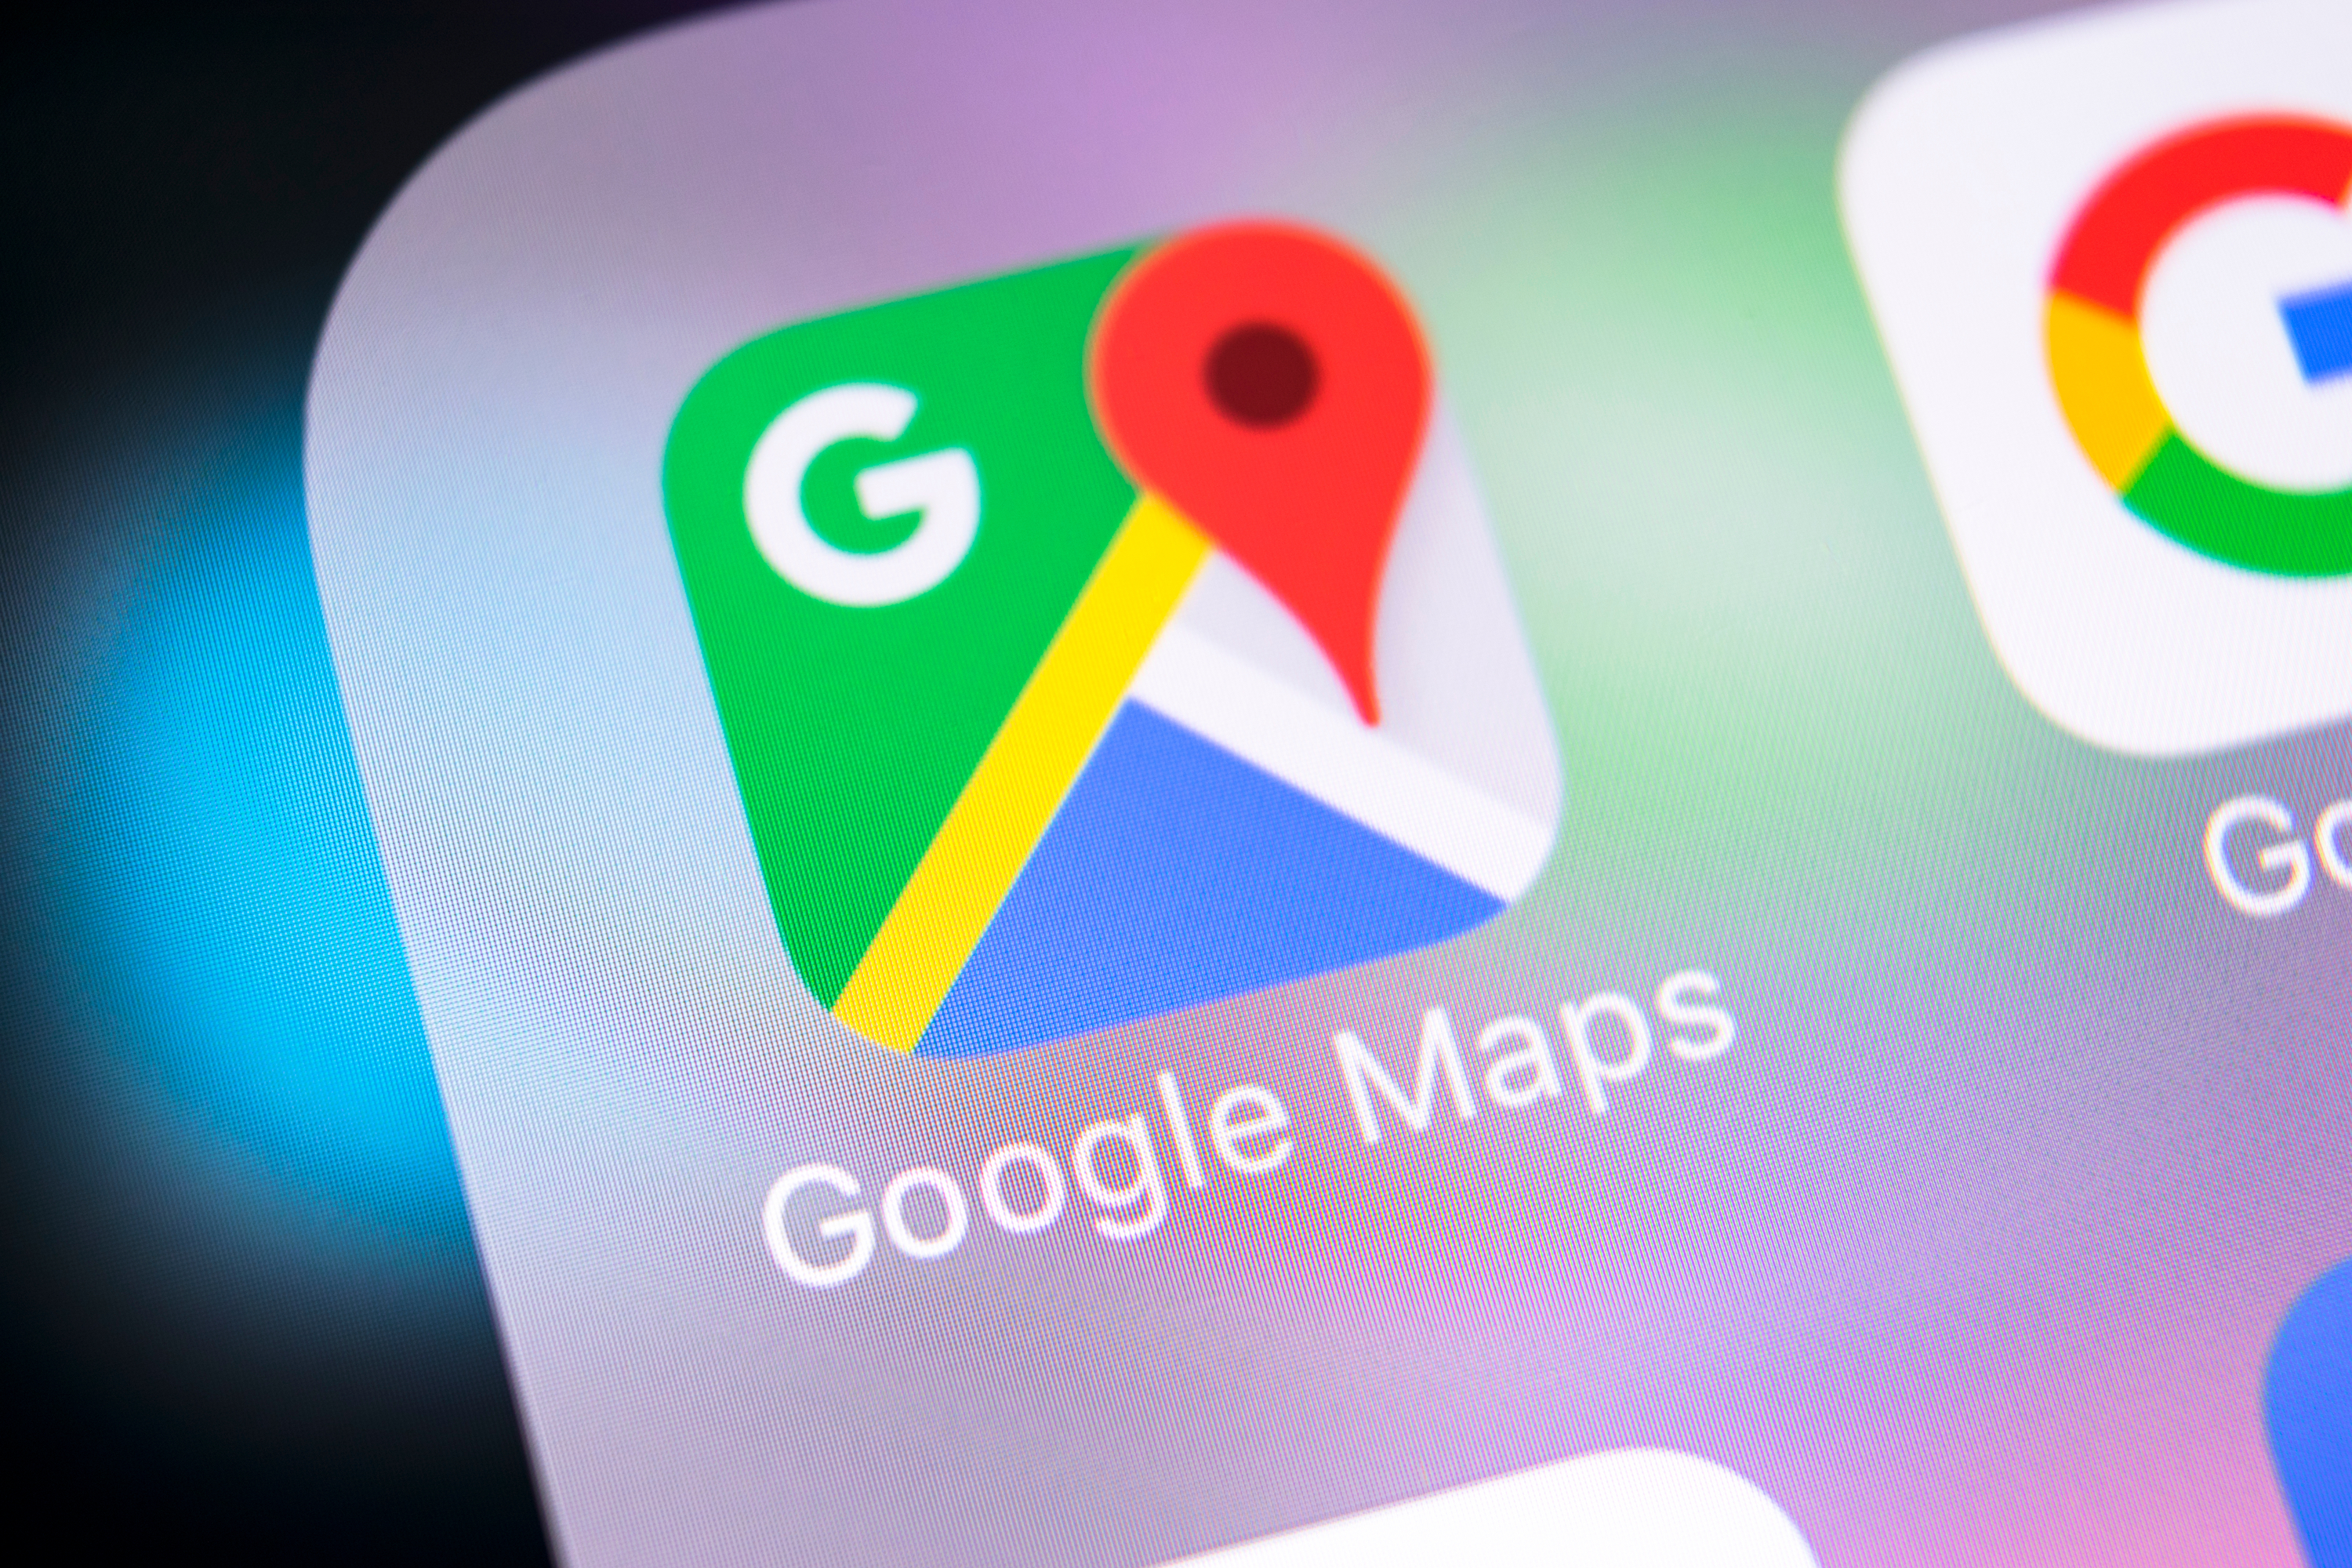 Google Maps just got a great new feature to help you find clean air